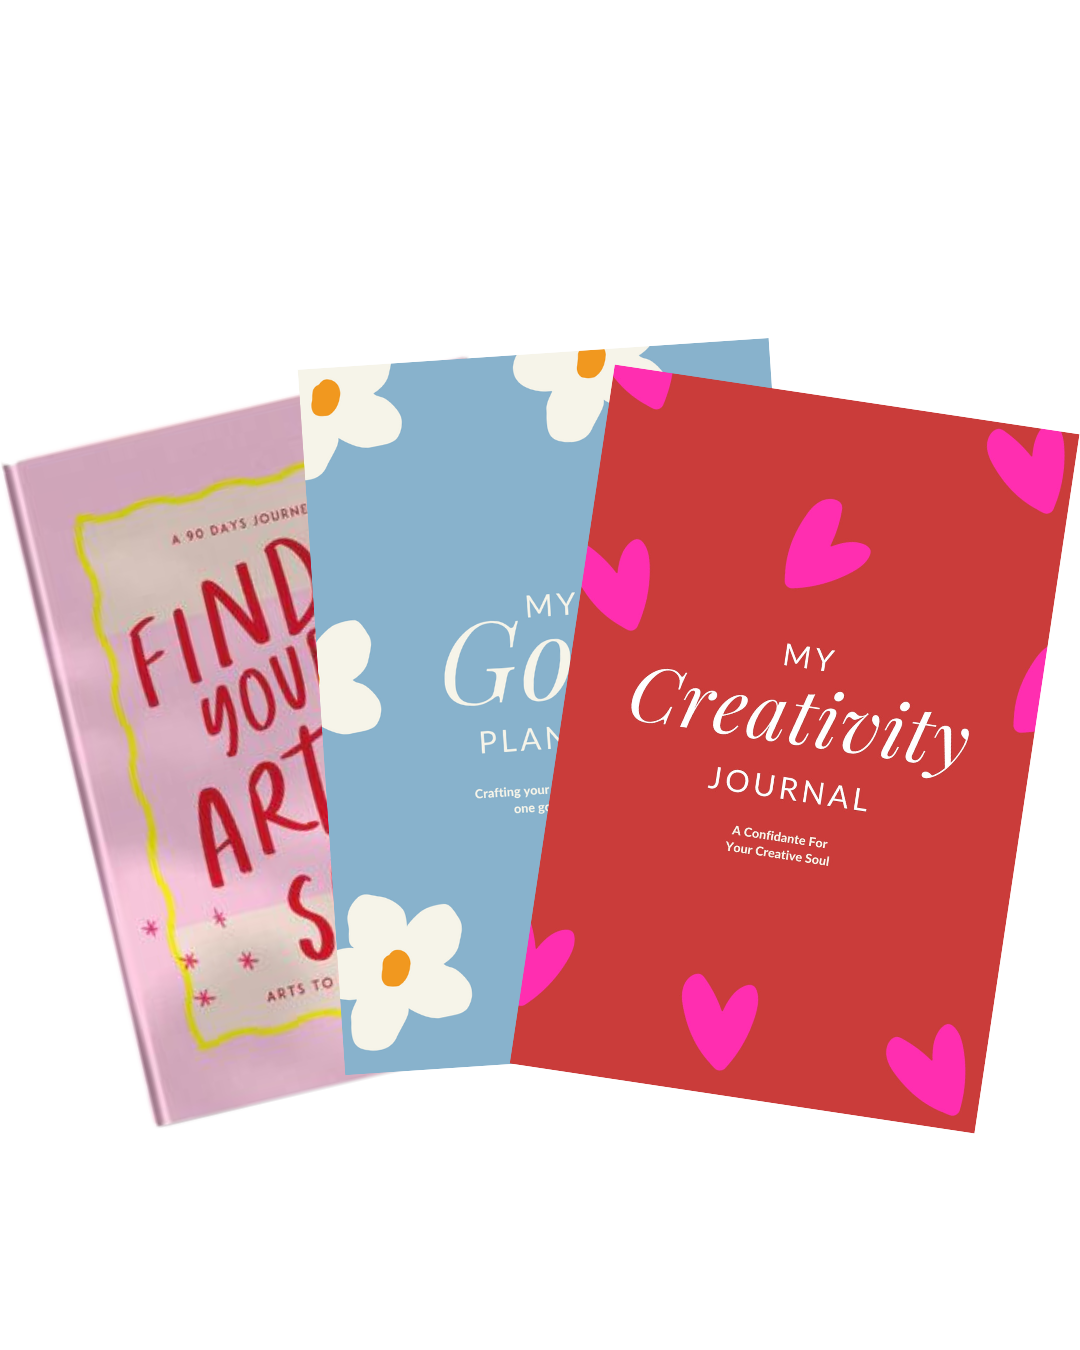 ATH Quest Books + My Creativity Journal + My Goal Planner Combo Pack